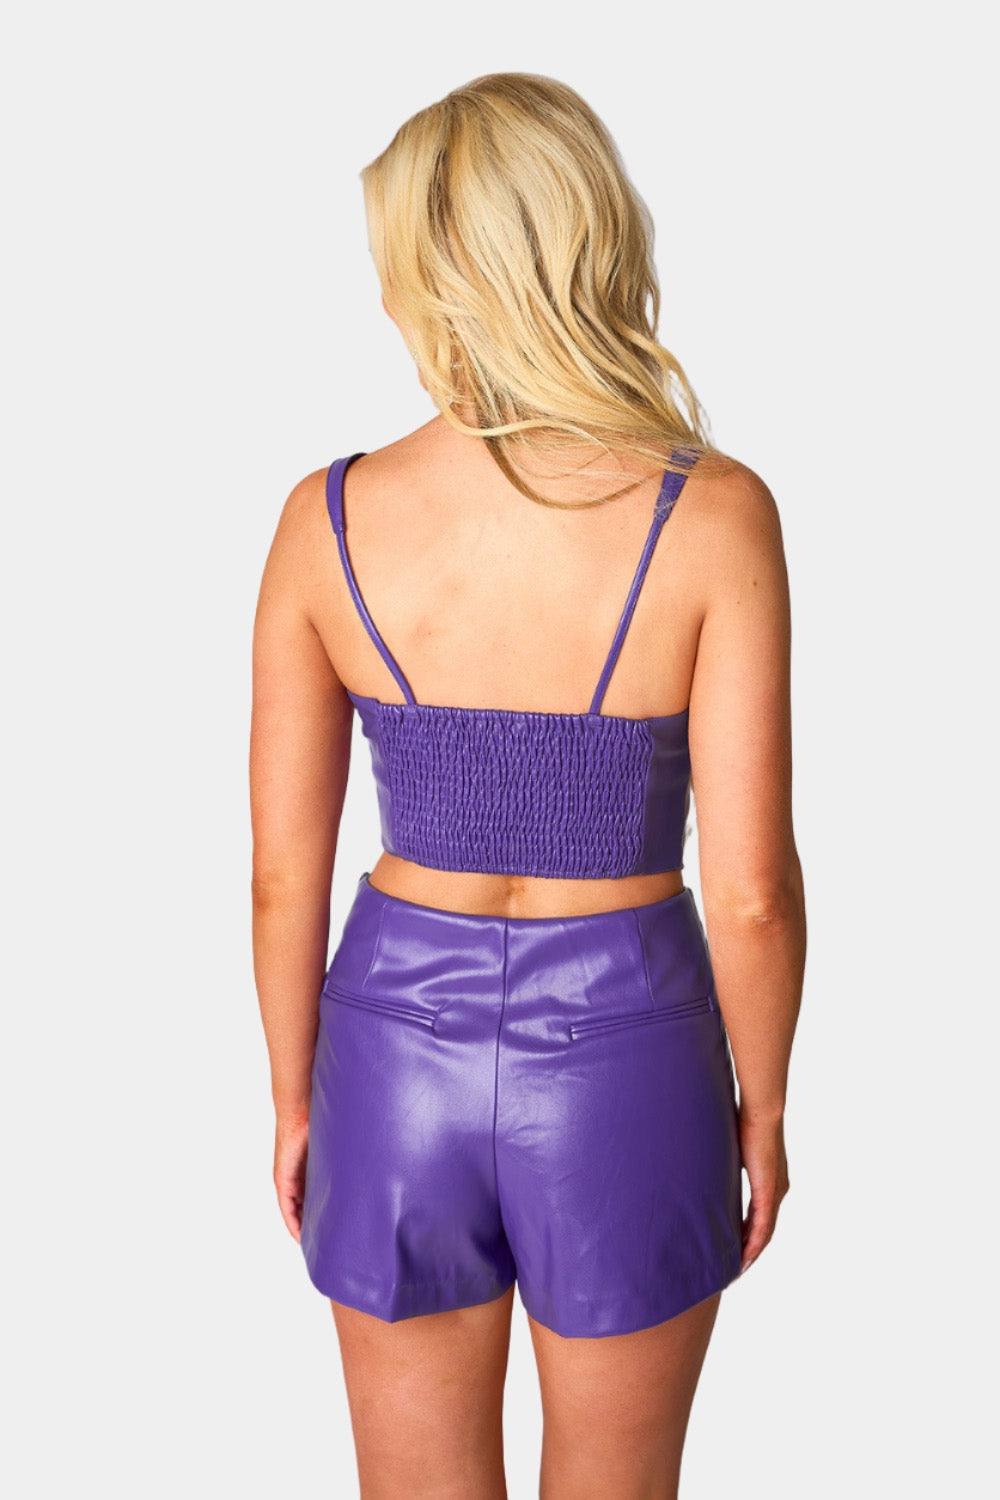 8 By YOOX LEATHER BODYCON CROP TOP, Lilac Women's Bustier